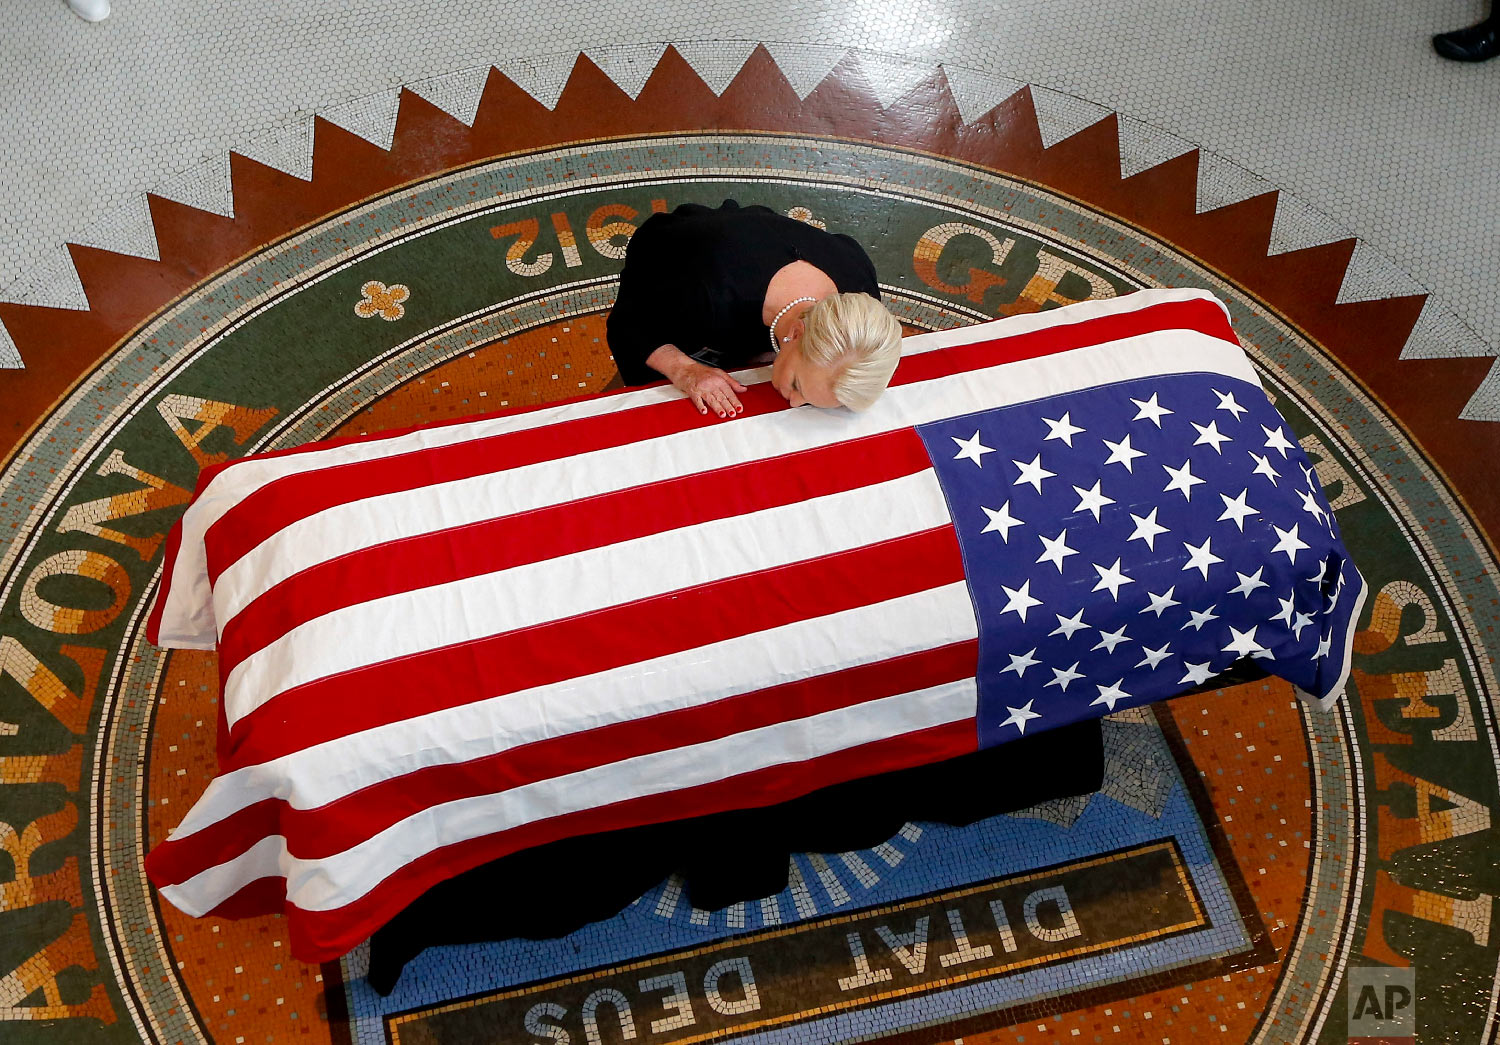  Cindy McCain, wife of Sen. John McCain, R-Ariz., rests her head on his casket during a memorial service at the Arizona Capitol in Phoenix on Aug. 29, 2018. (AP Photo/Ross D. Franklin) 